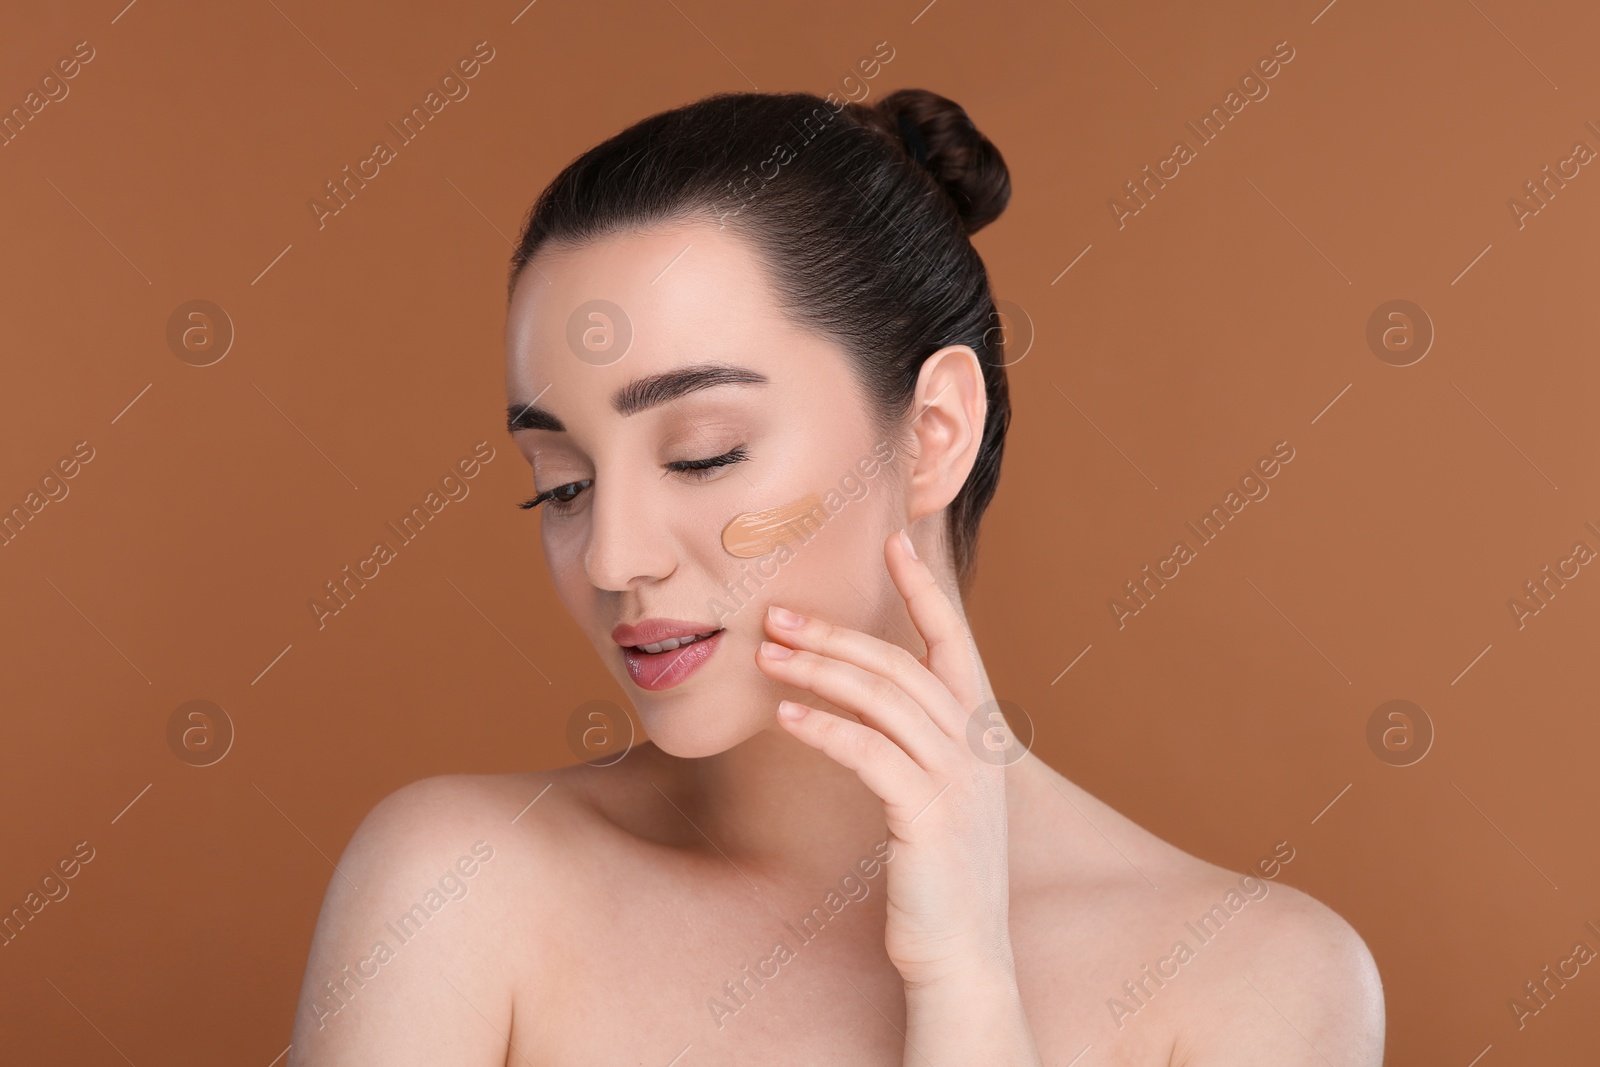 Photo of Woman with swatch of foundation on face against brown background